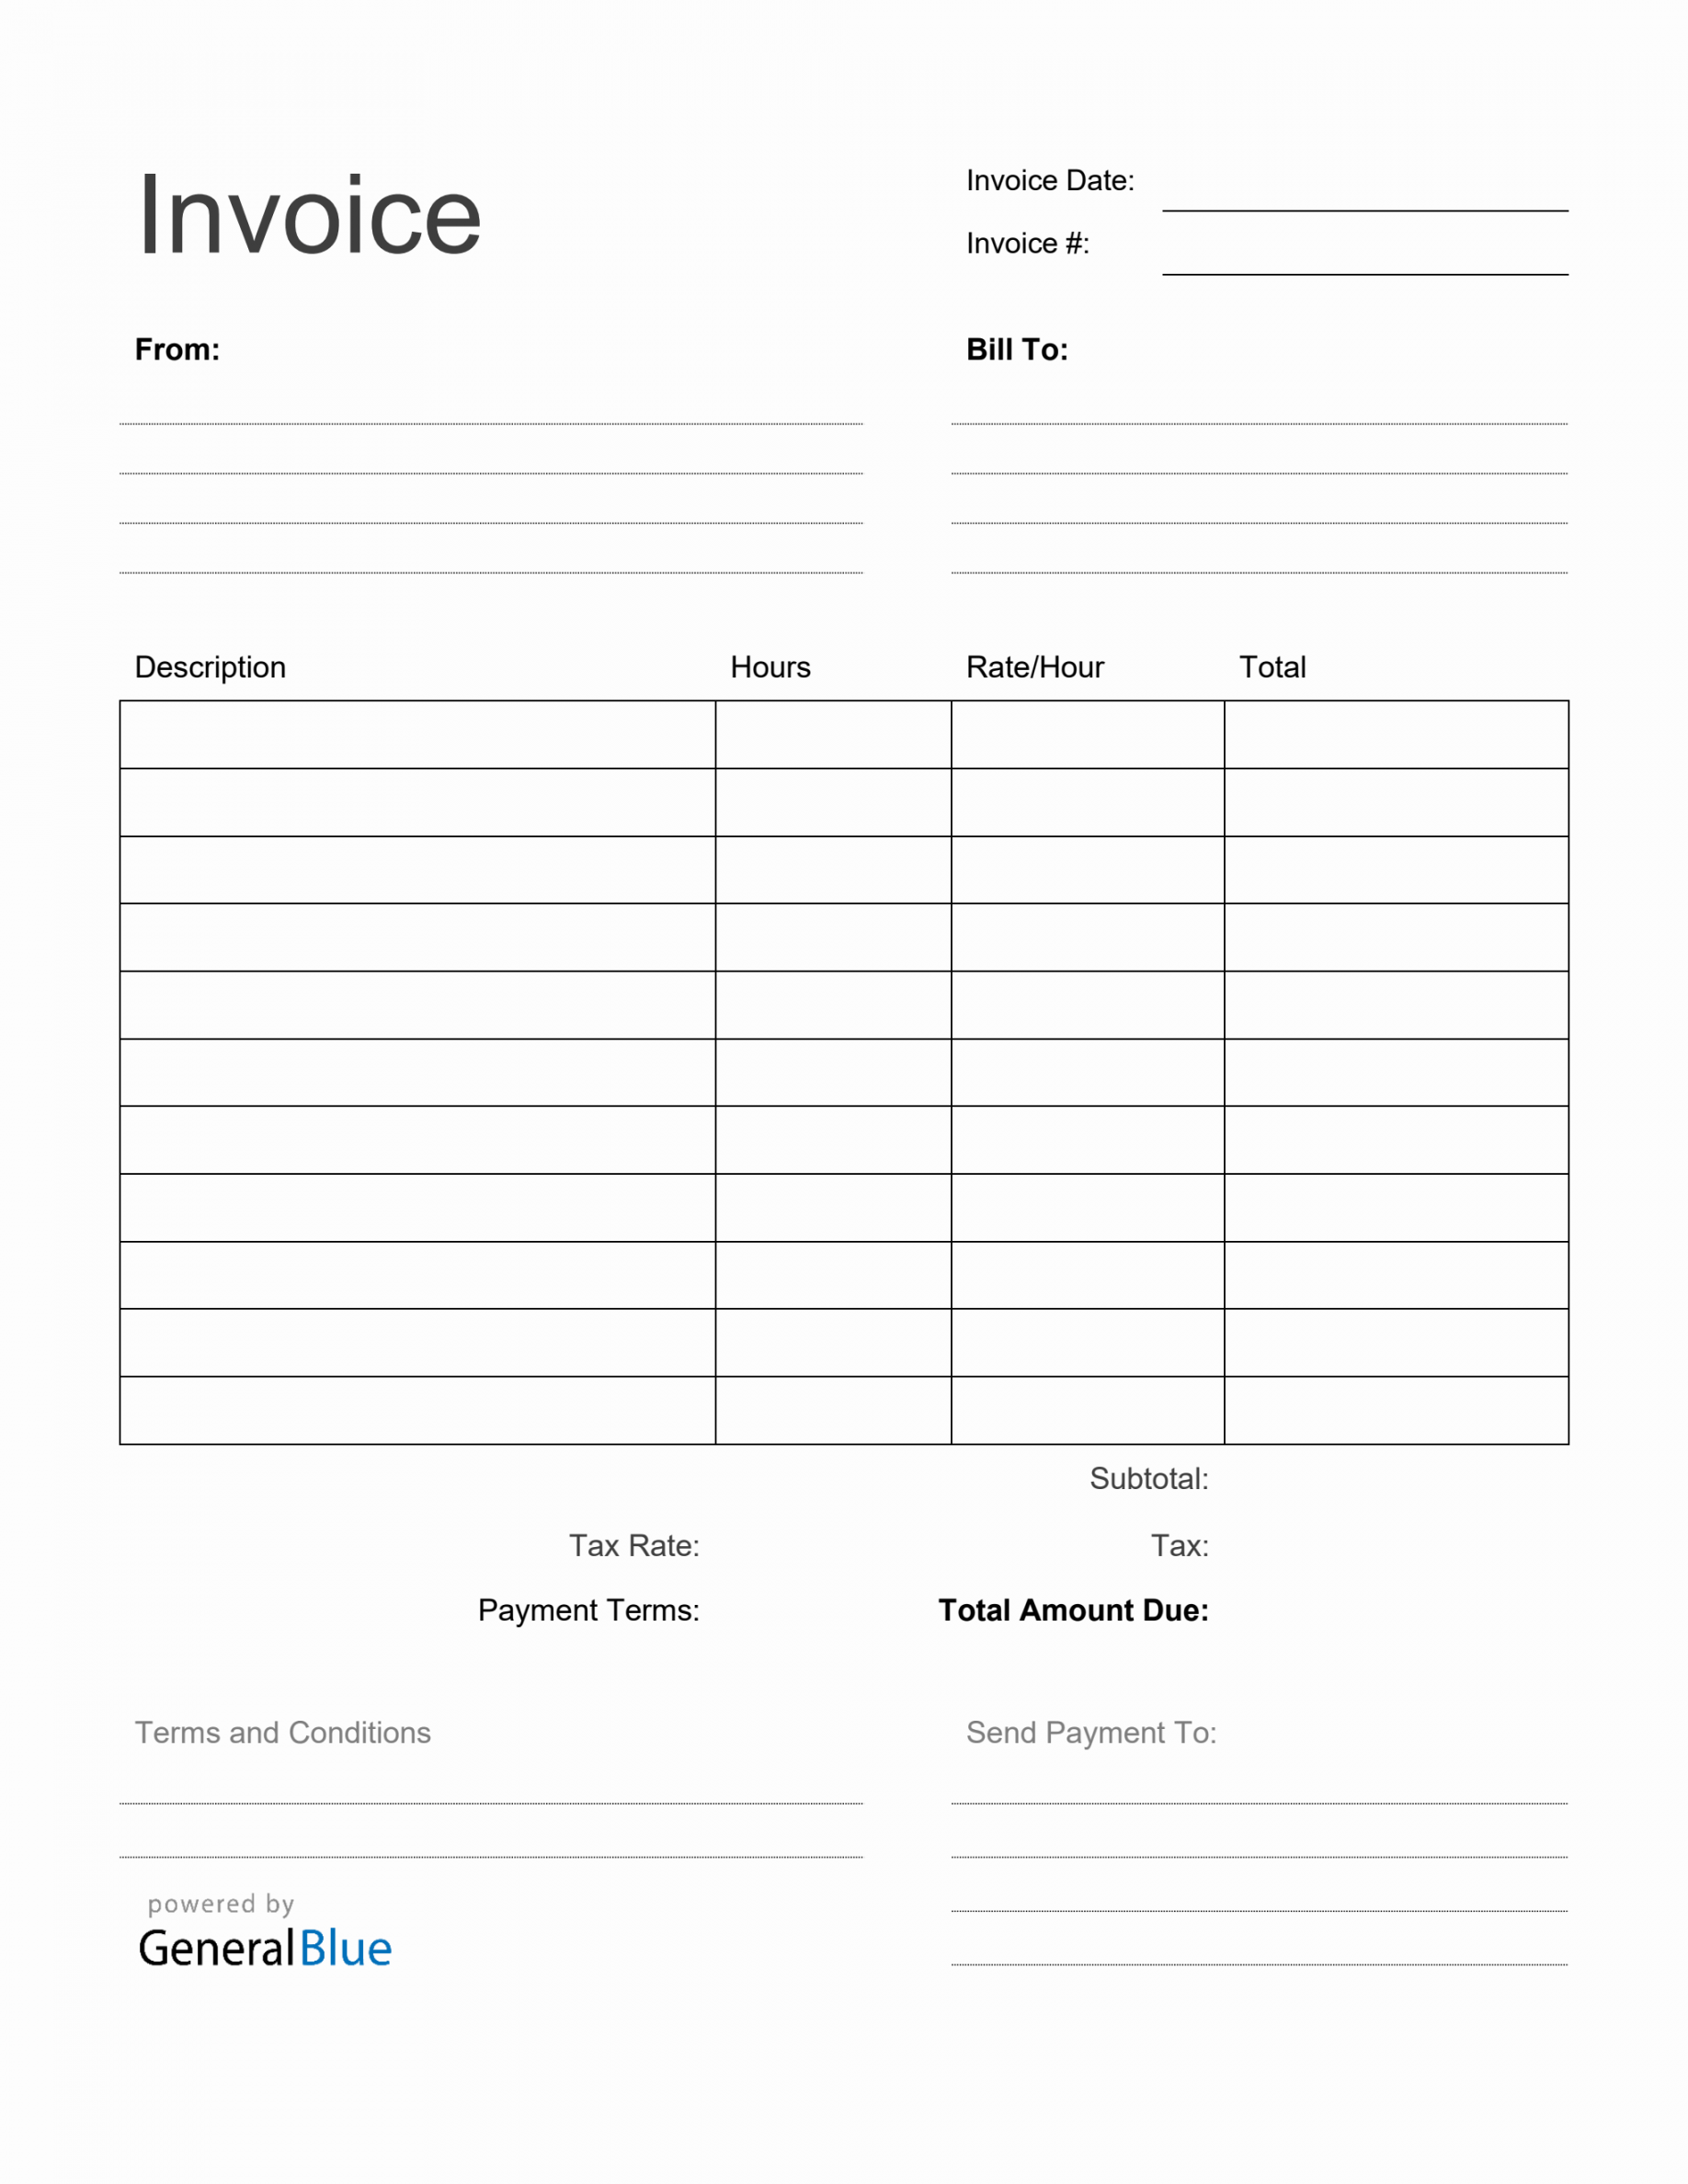 Printable Invoices For Free - Printable - Blank Invoice Template in Word Printable